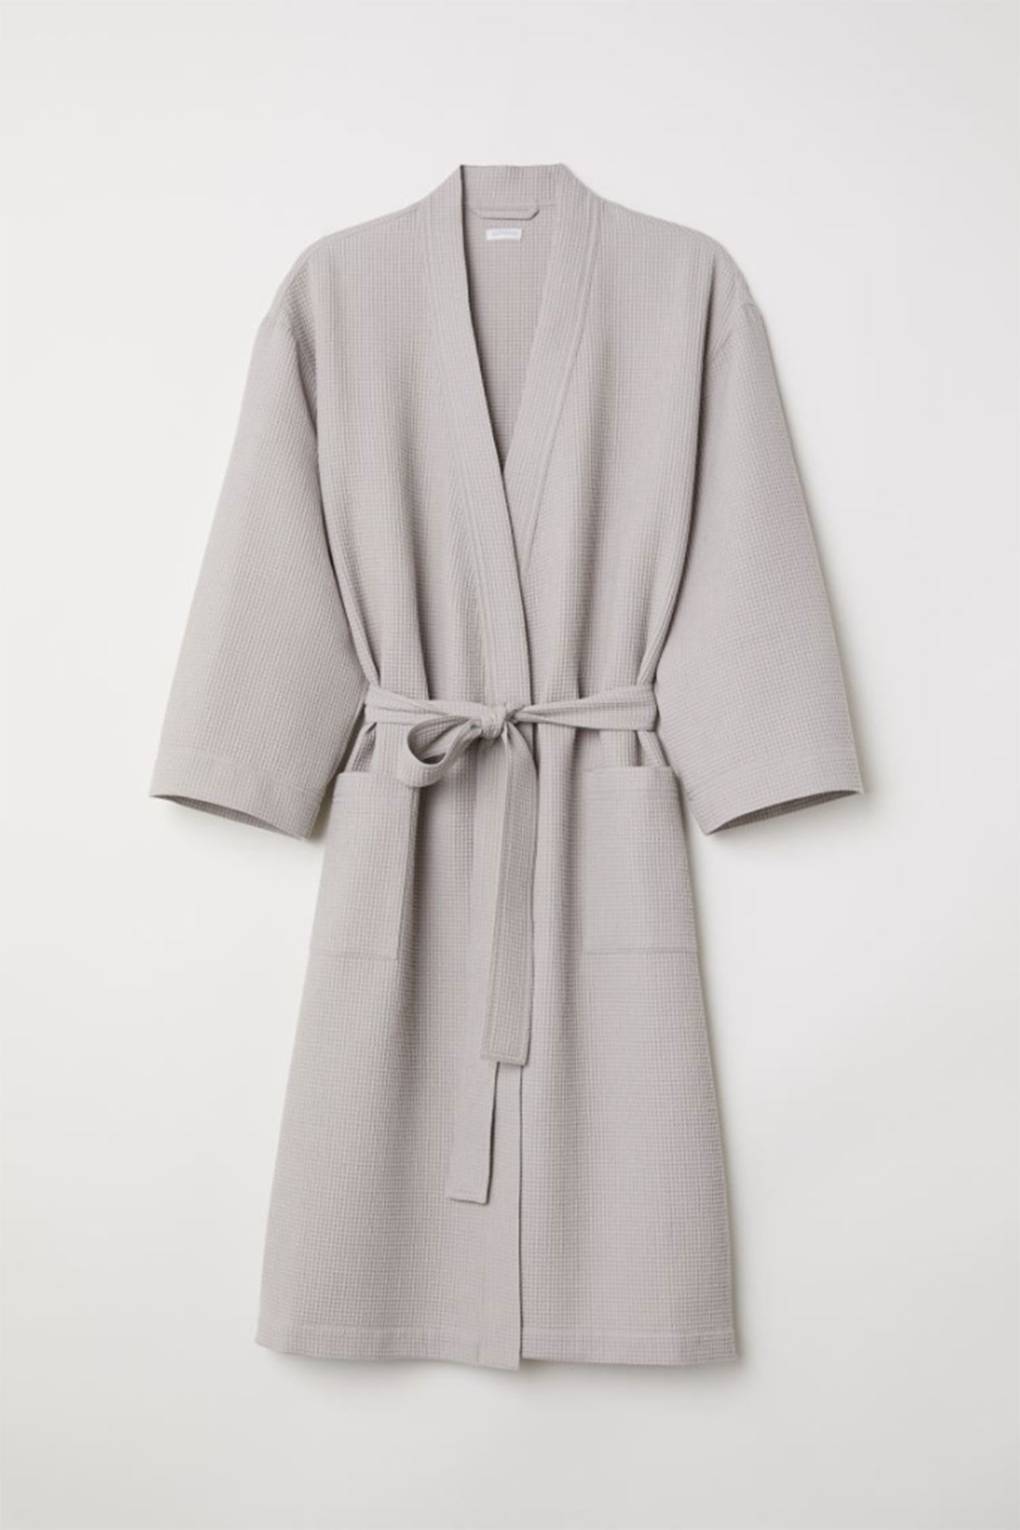 The Best Women's Dressing Gowns And Robes For Comfort & Style | Glamour UK